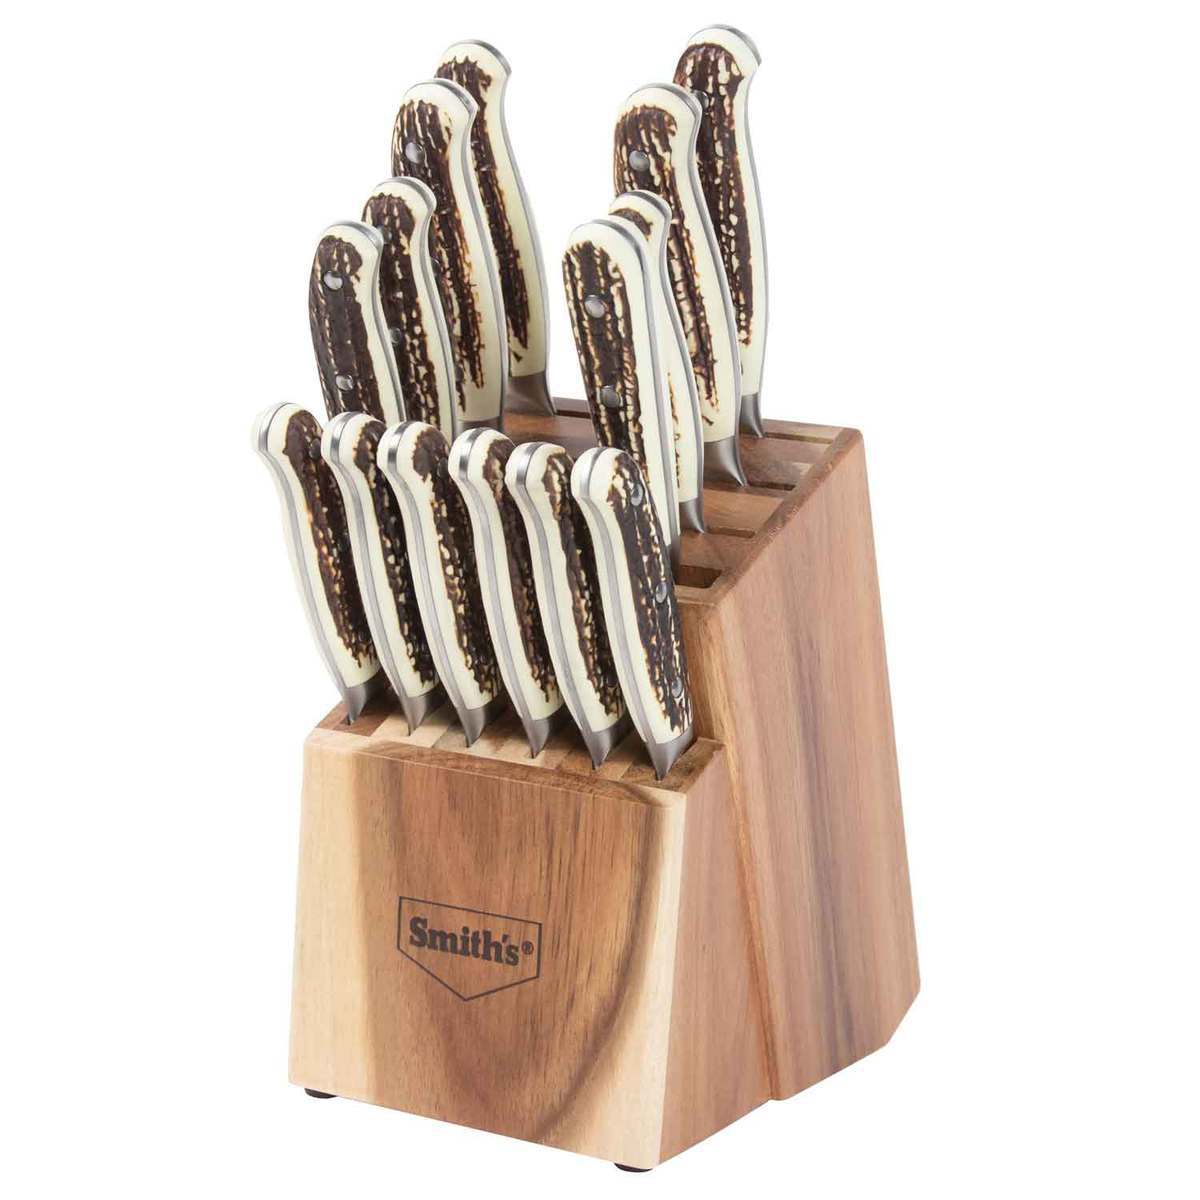 Knife Sets for sale in Hickman, California